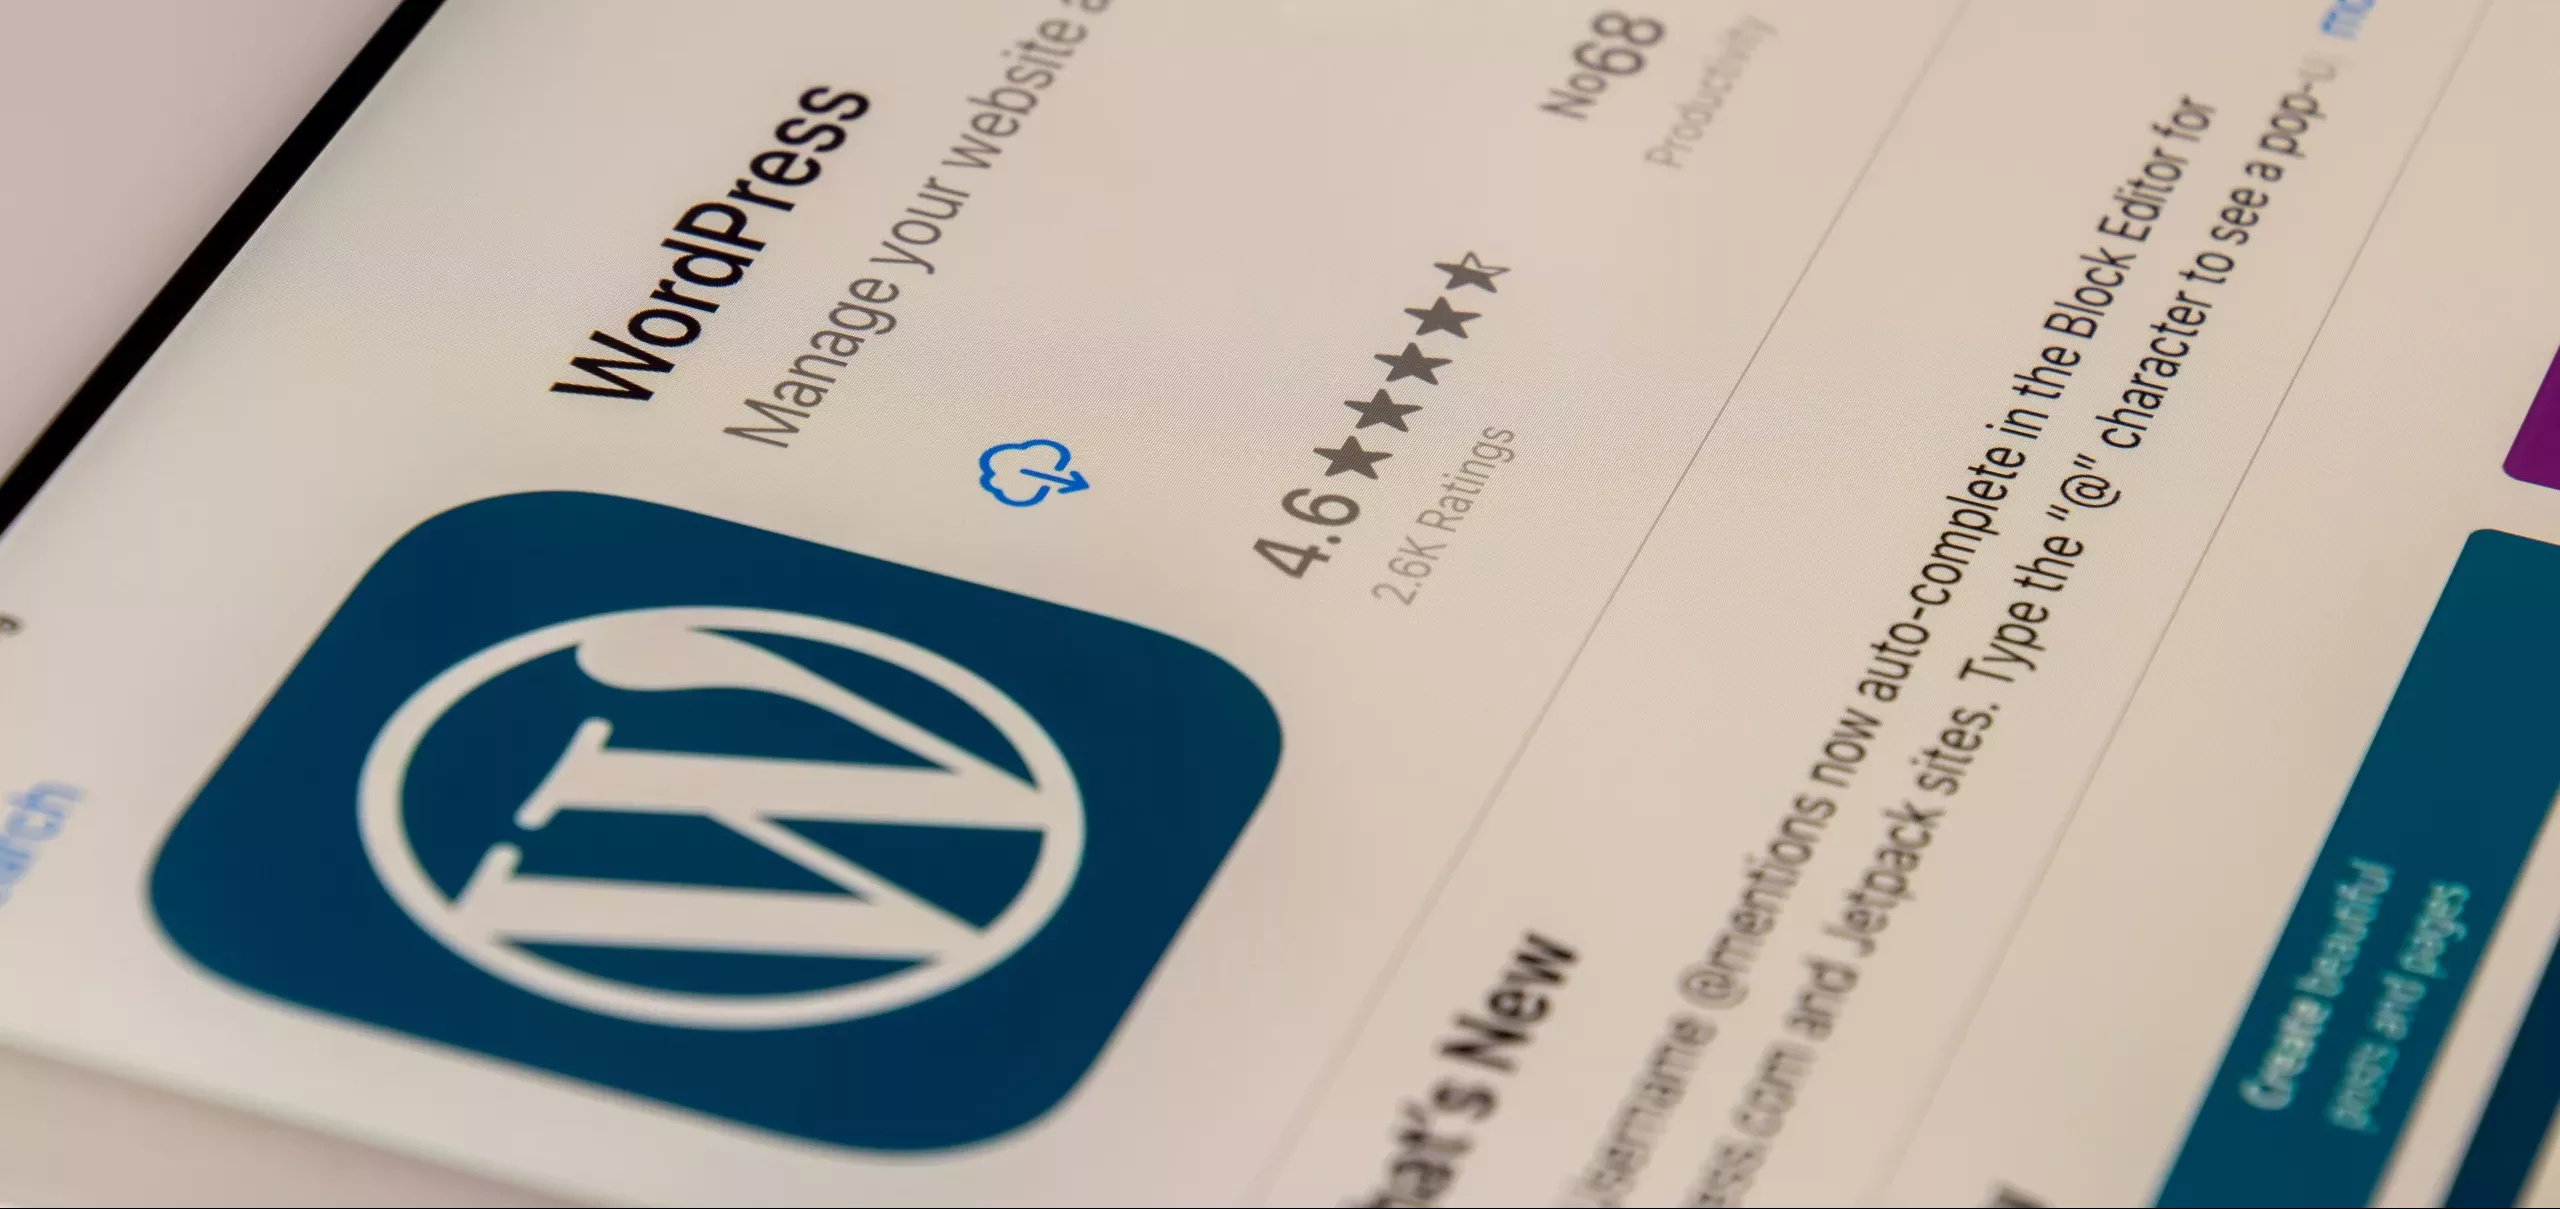 5 Reasons WordPress Is Actually a Good Thing